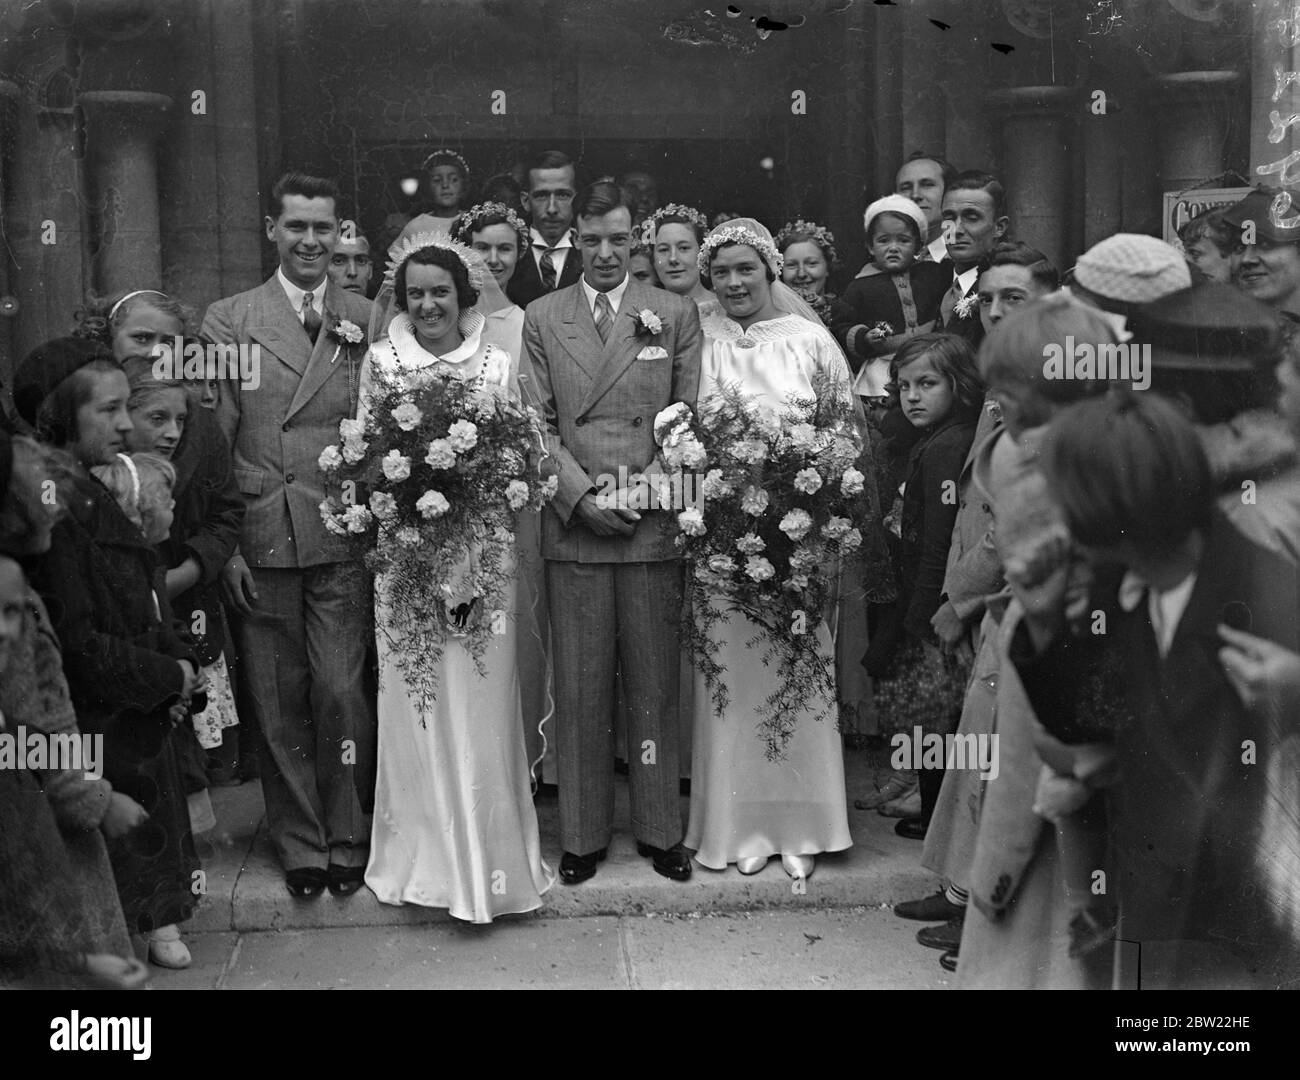 The brides and grooms leaving an unusual double wedding took place at St Matthew's Church, Southampton, when a brother and sister, Mr Francis John Craddock and miss Edith May Craddick married sister and brother, miss Flossie Annie Bartlett and Mr Frederick Ernest Bartlett. All four are members of the Mayfield novelty accordion band 11 September 1937. Stock Photo